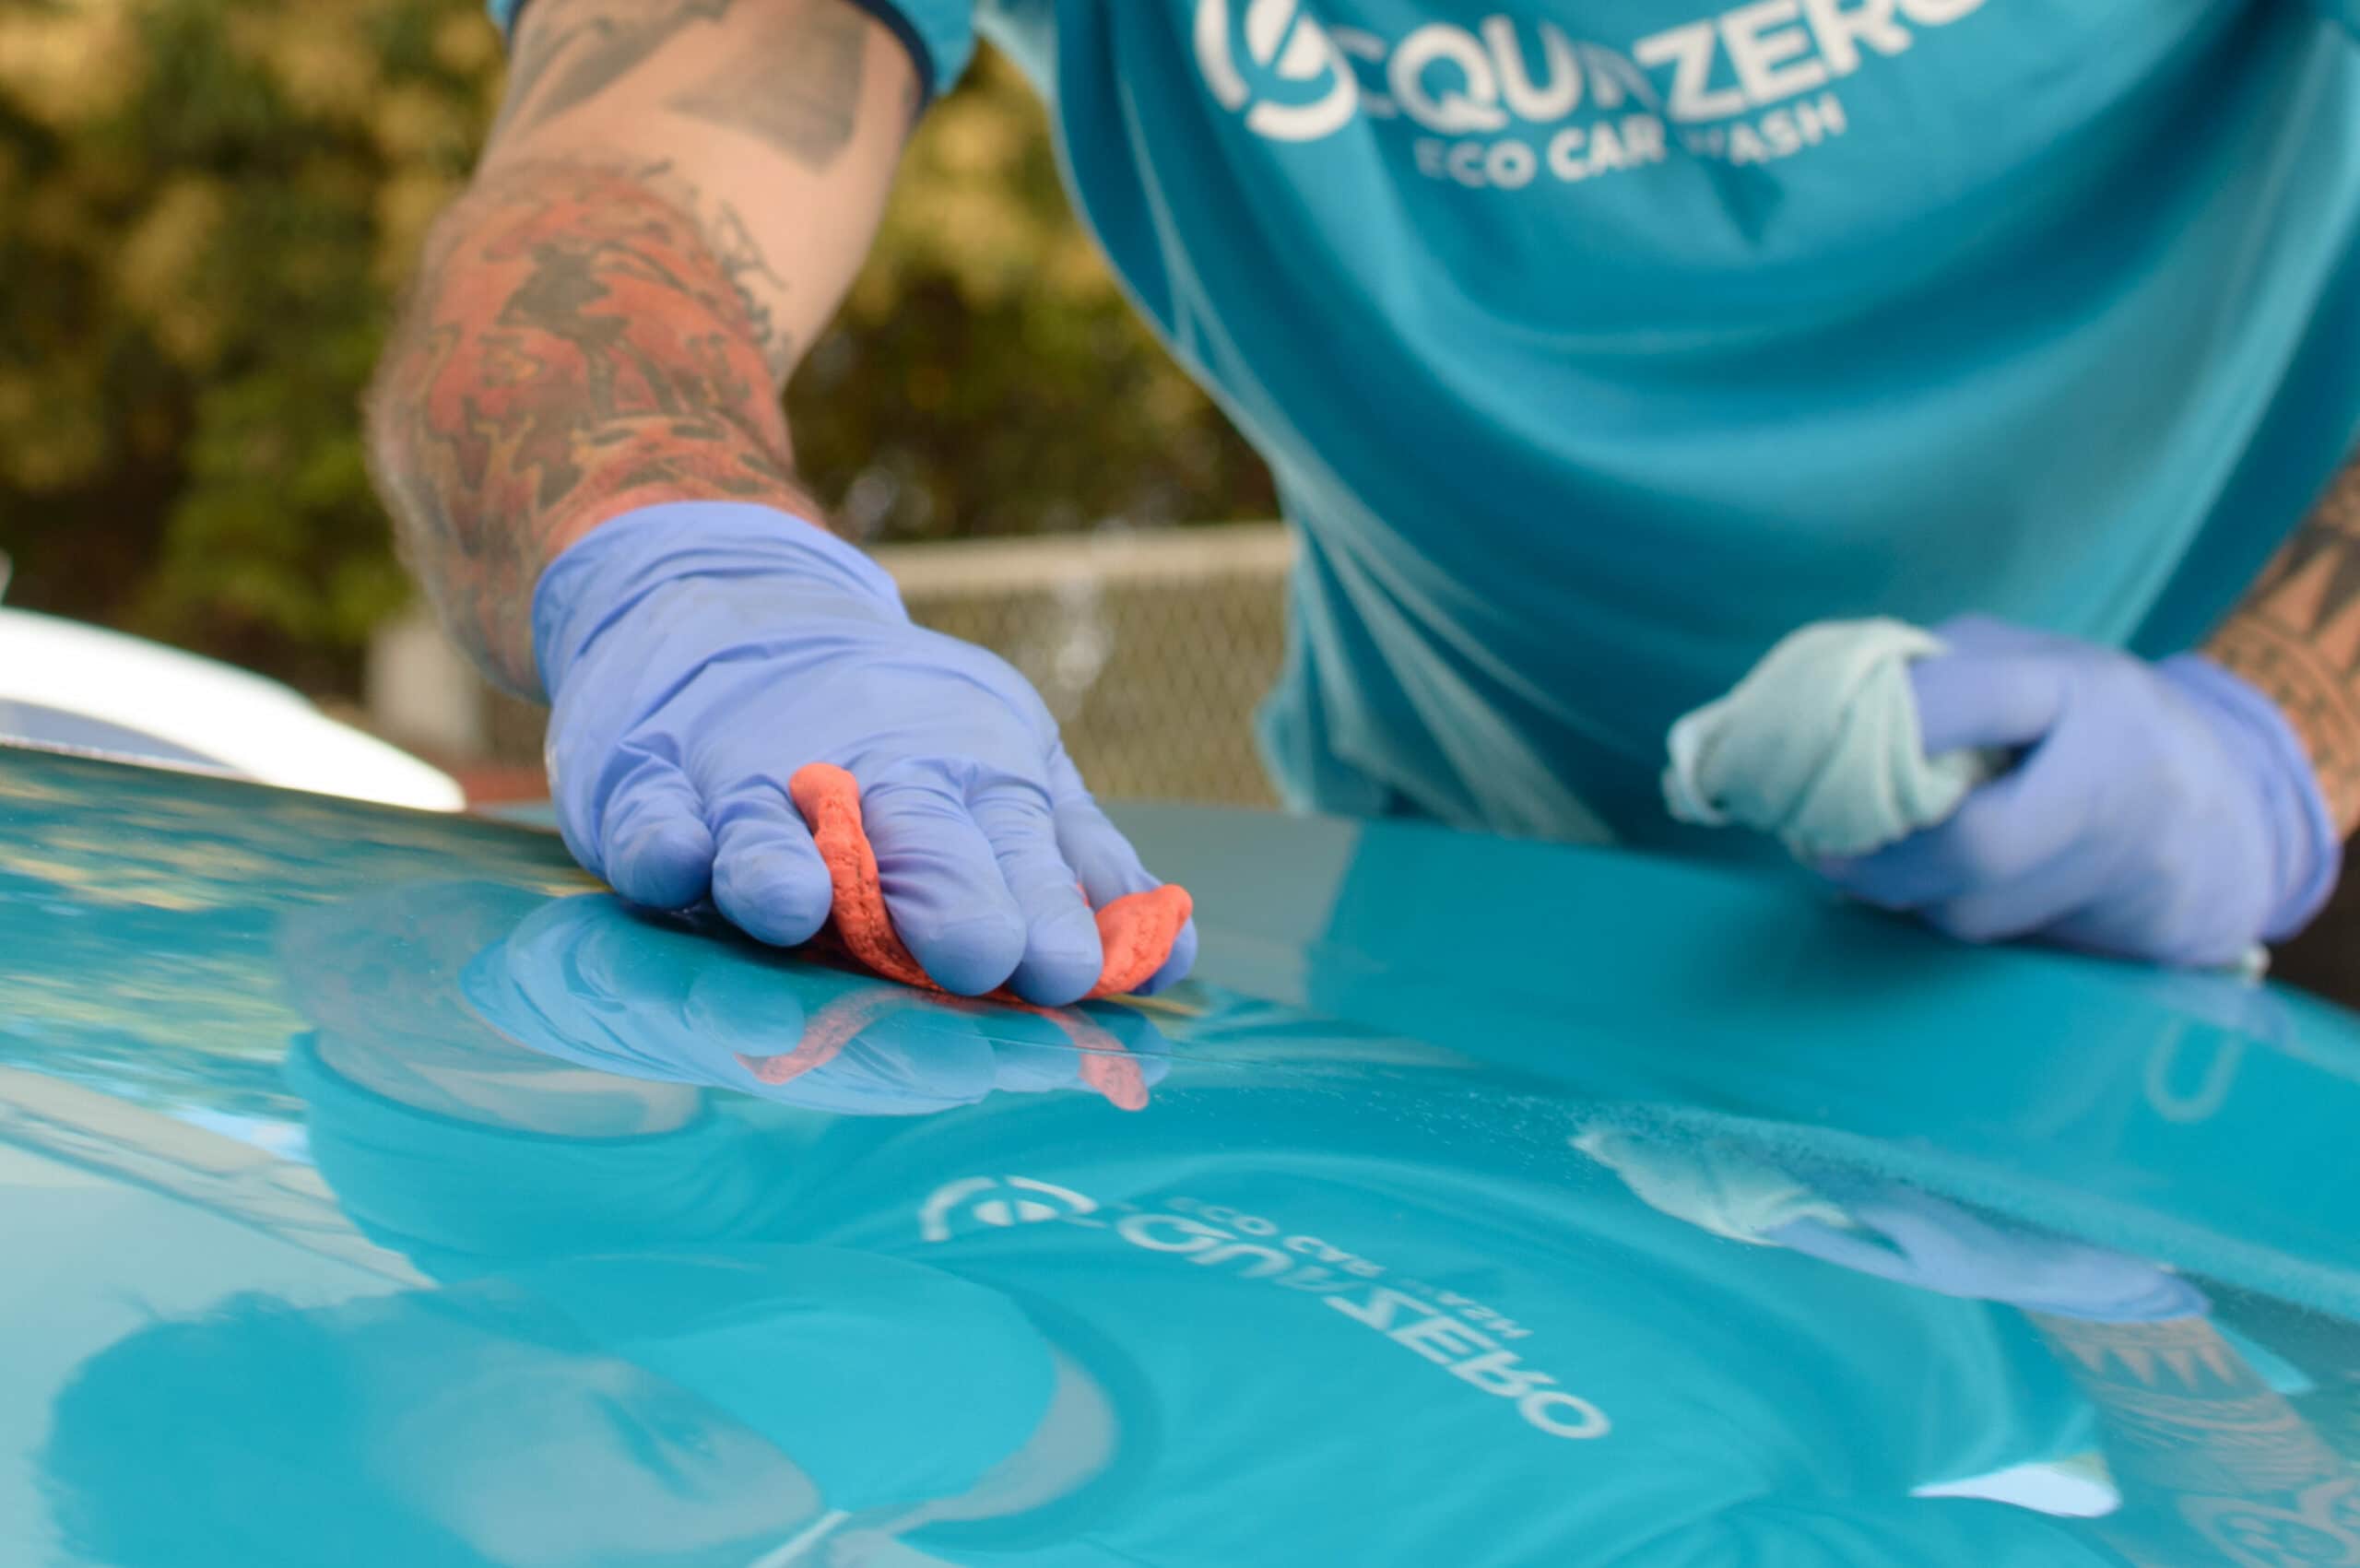 Acquazero employee in the company's uniform, wearing blue gloves and doing a procedure in a blue car, with an orange flannel.  Illustrative image for the text washes jets in natal.